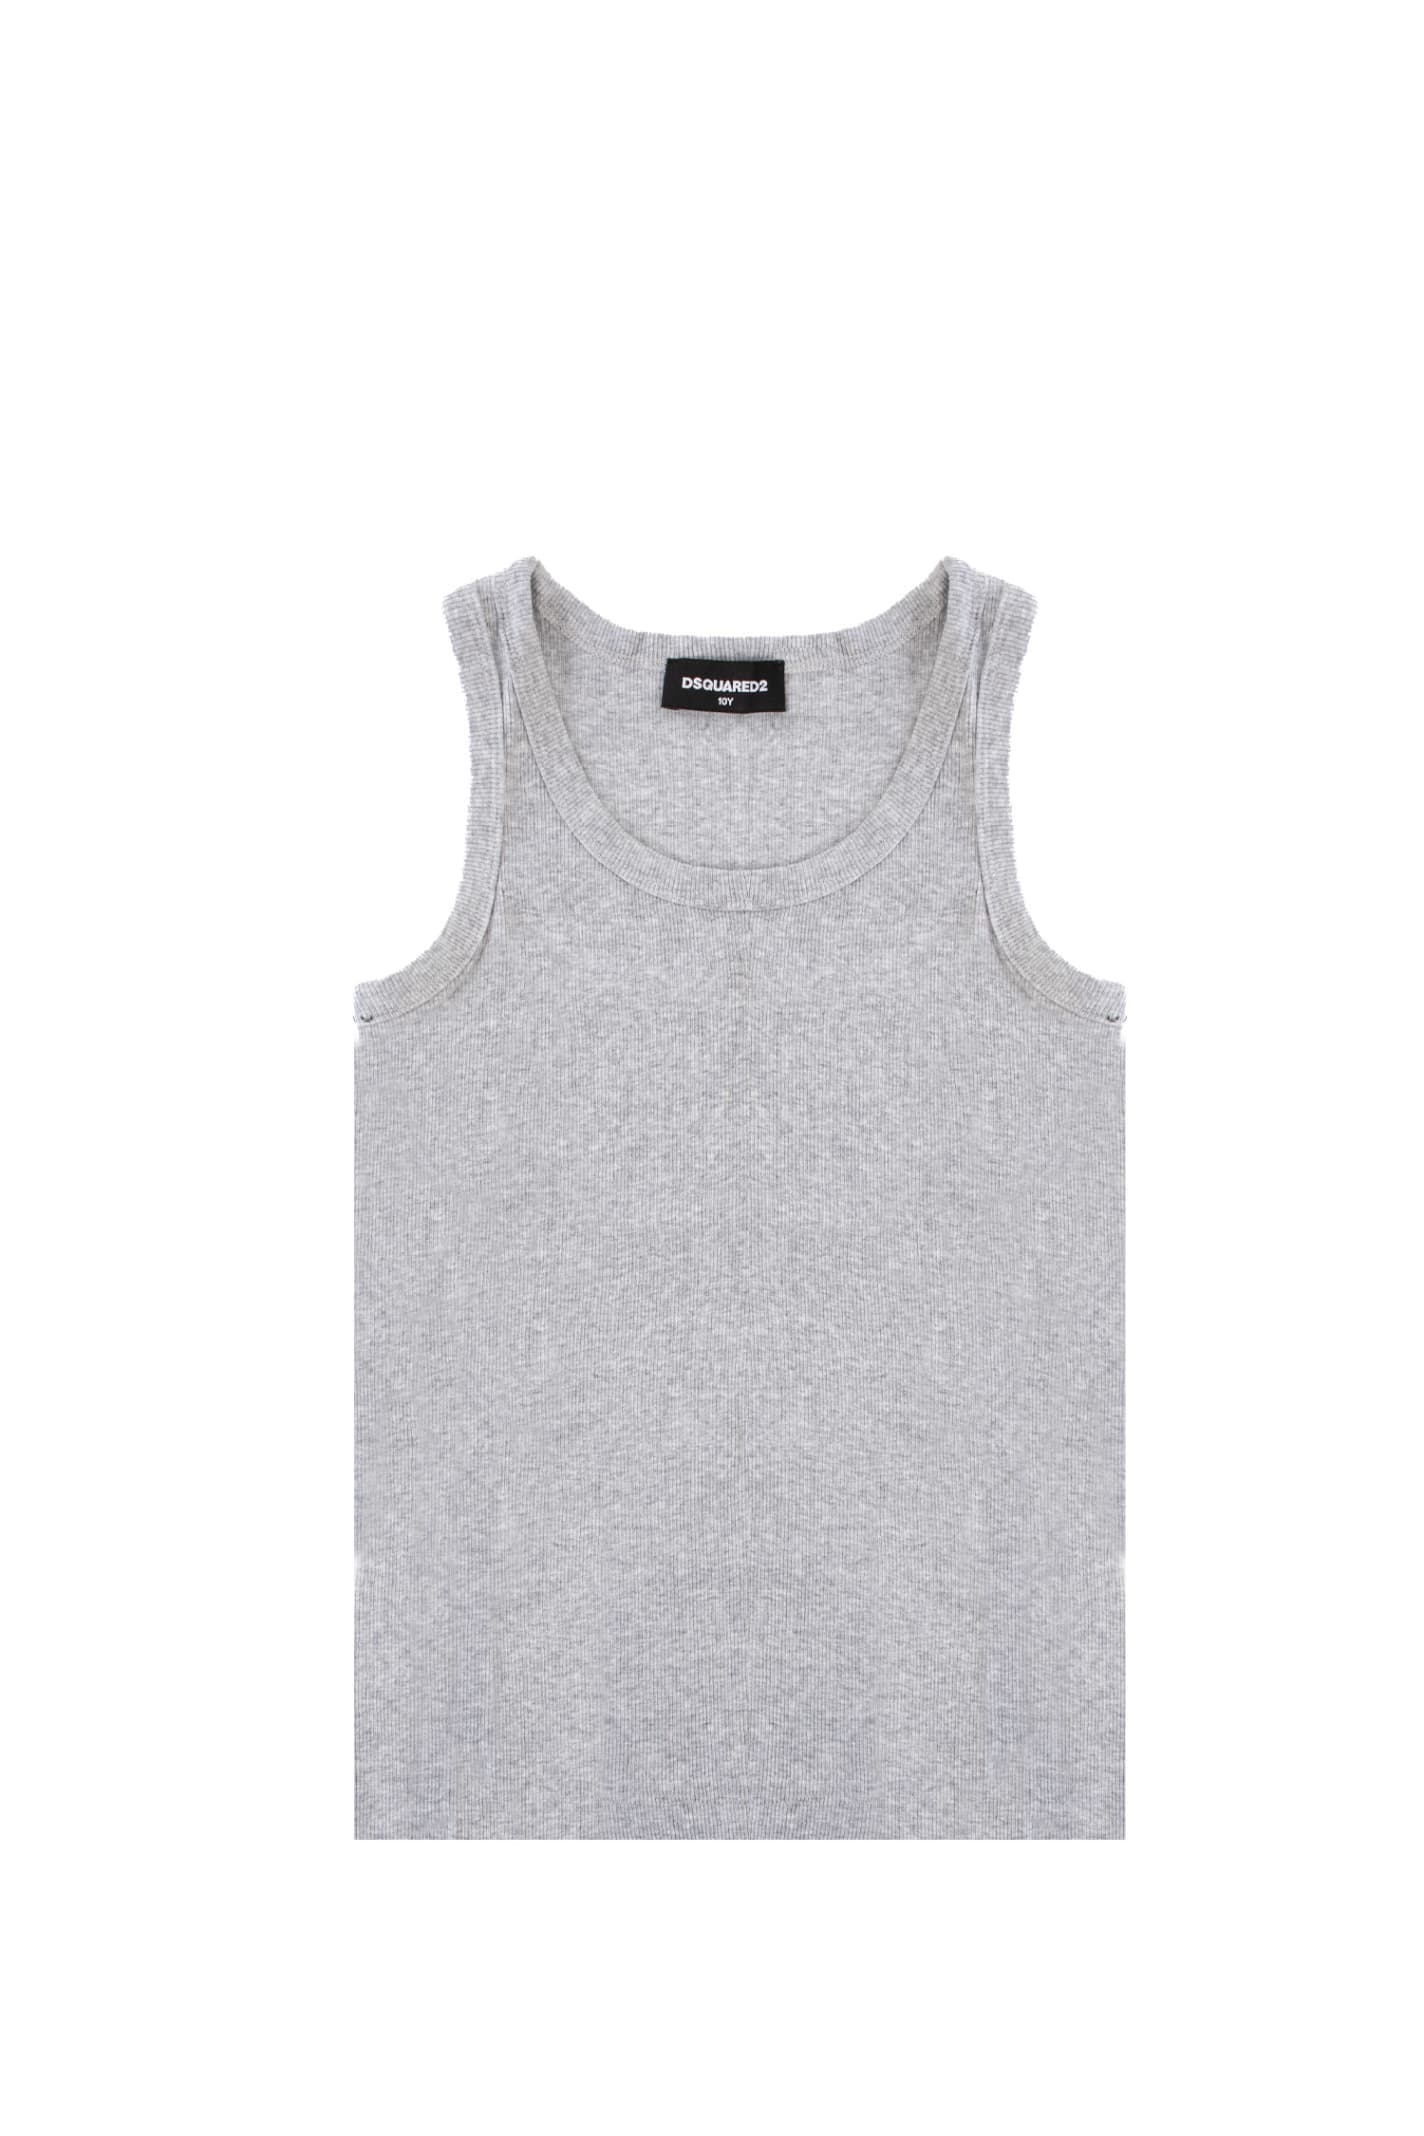 Dsquared2 Cotton Tank Top - Grey - male - Size: 12